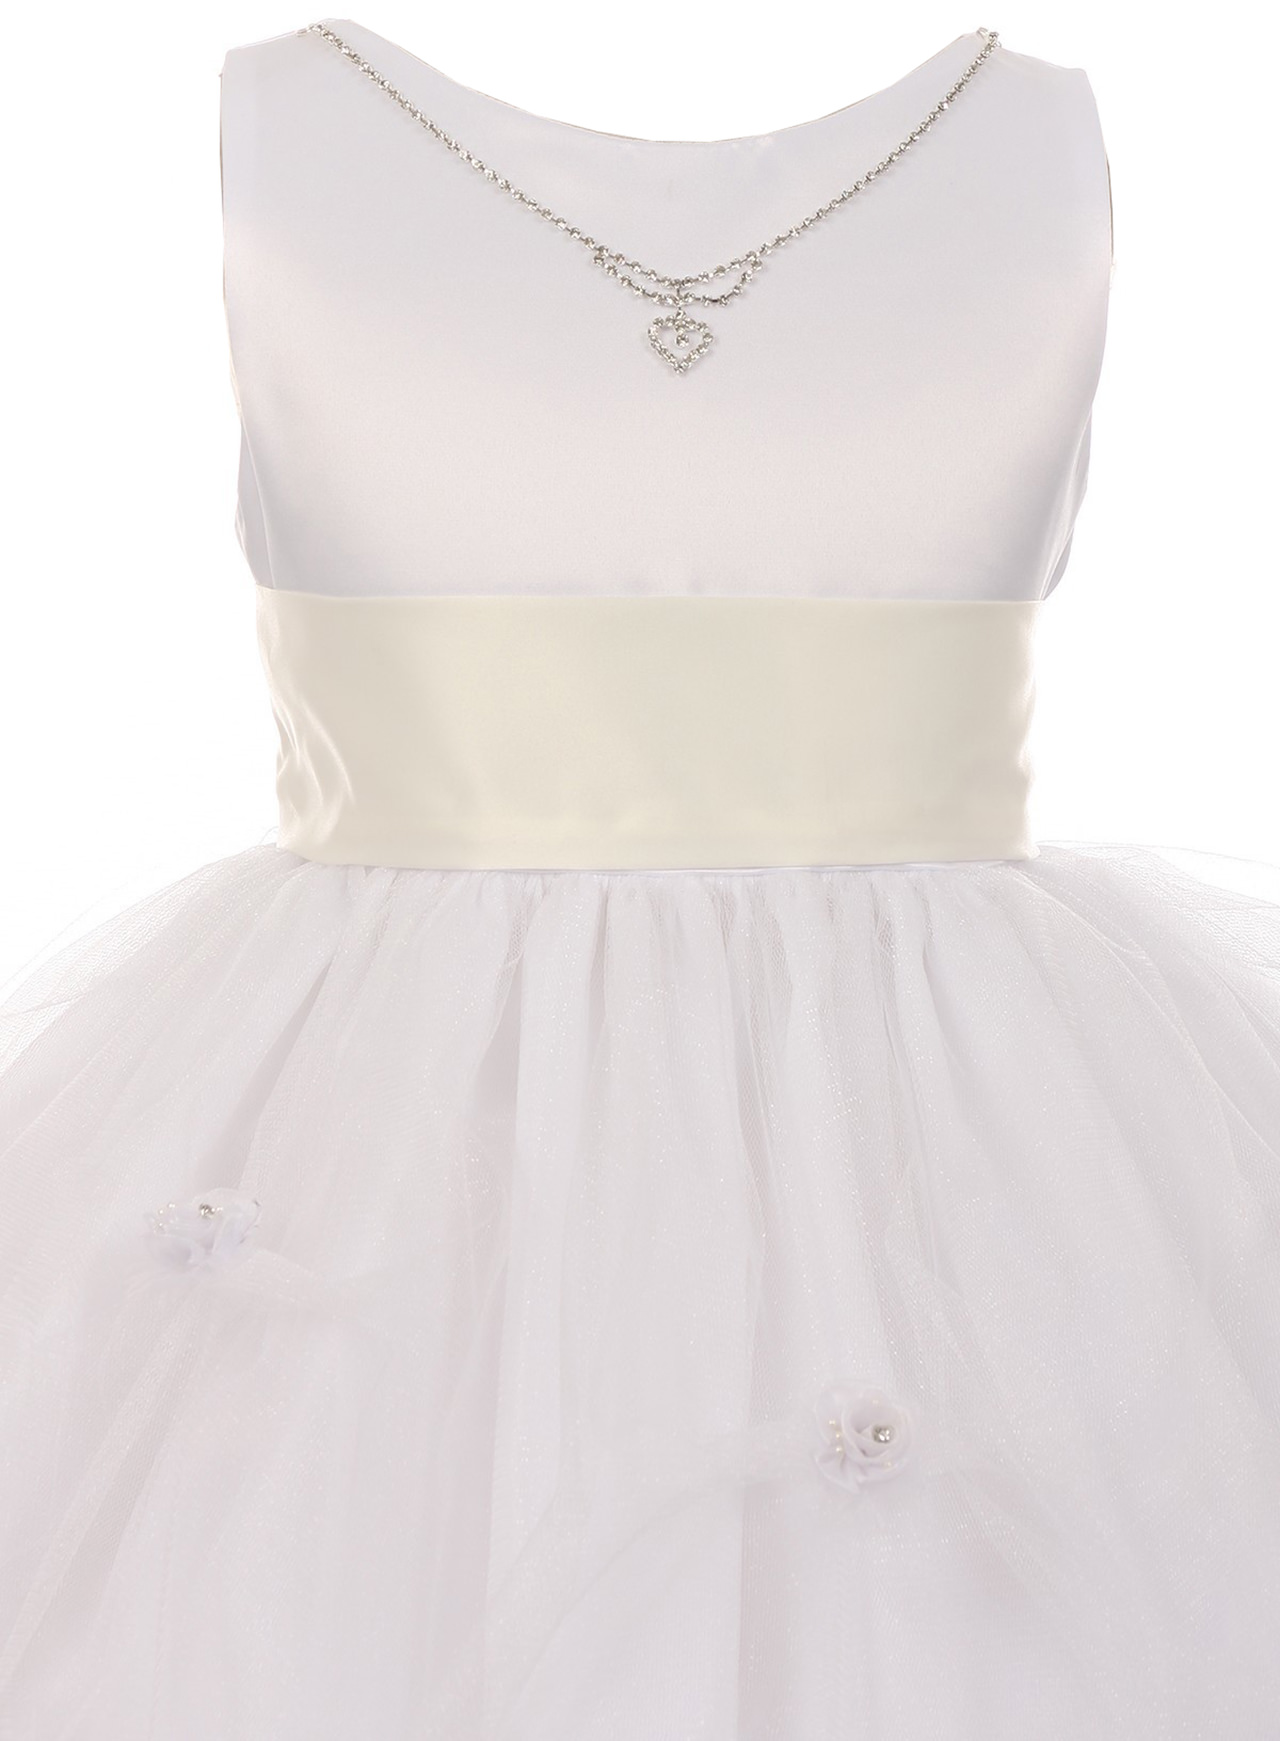 Big Girls' Sleeveless Crystal Necklace Tulle Pageant Communion Flower Girl Dress Red 12 (C01B16W) - image 3 of 3